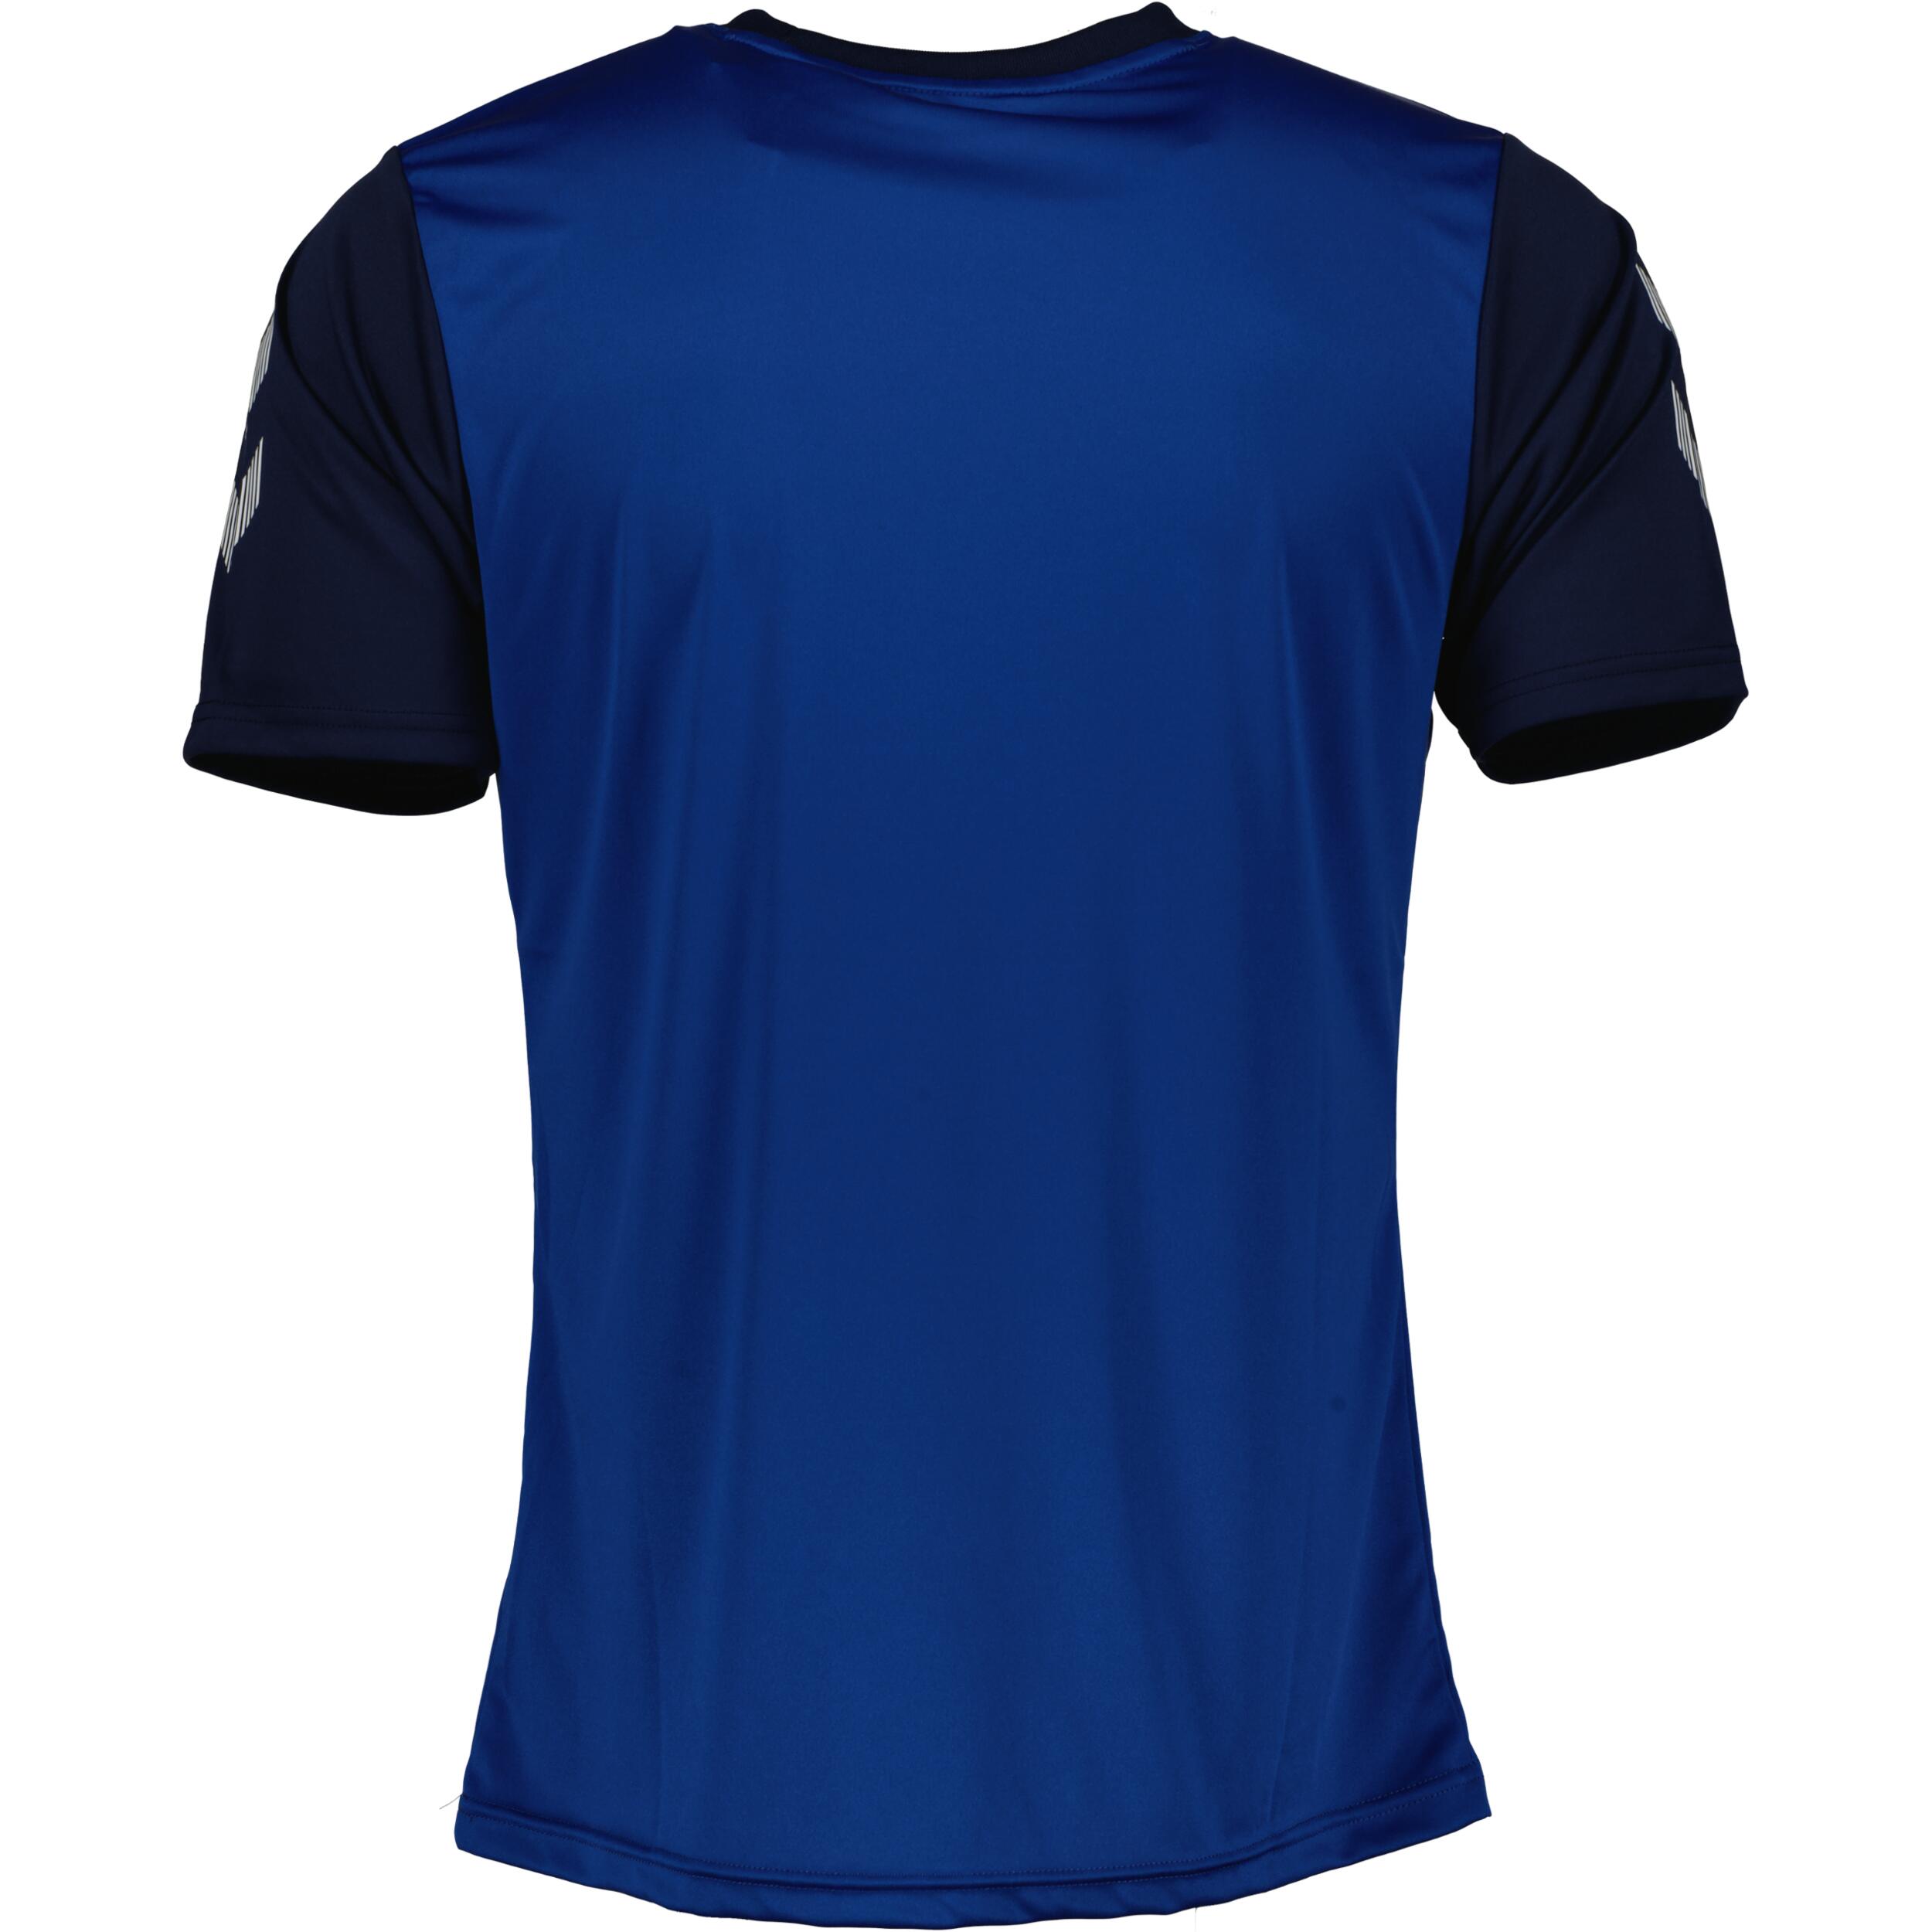 Match jersey for kids, great for football, in blue/marine 2/3